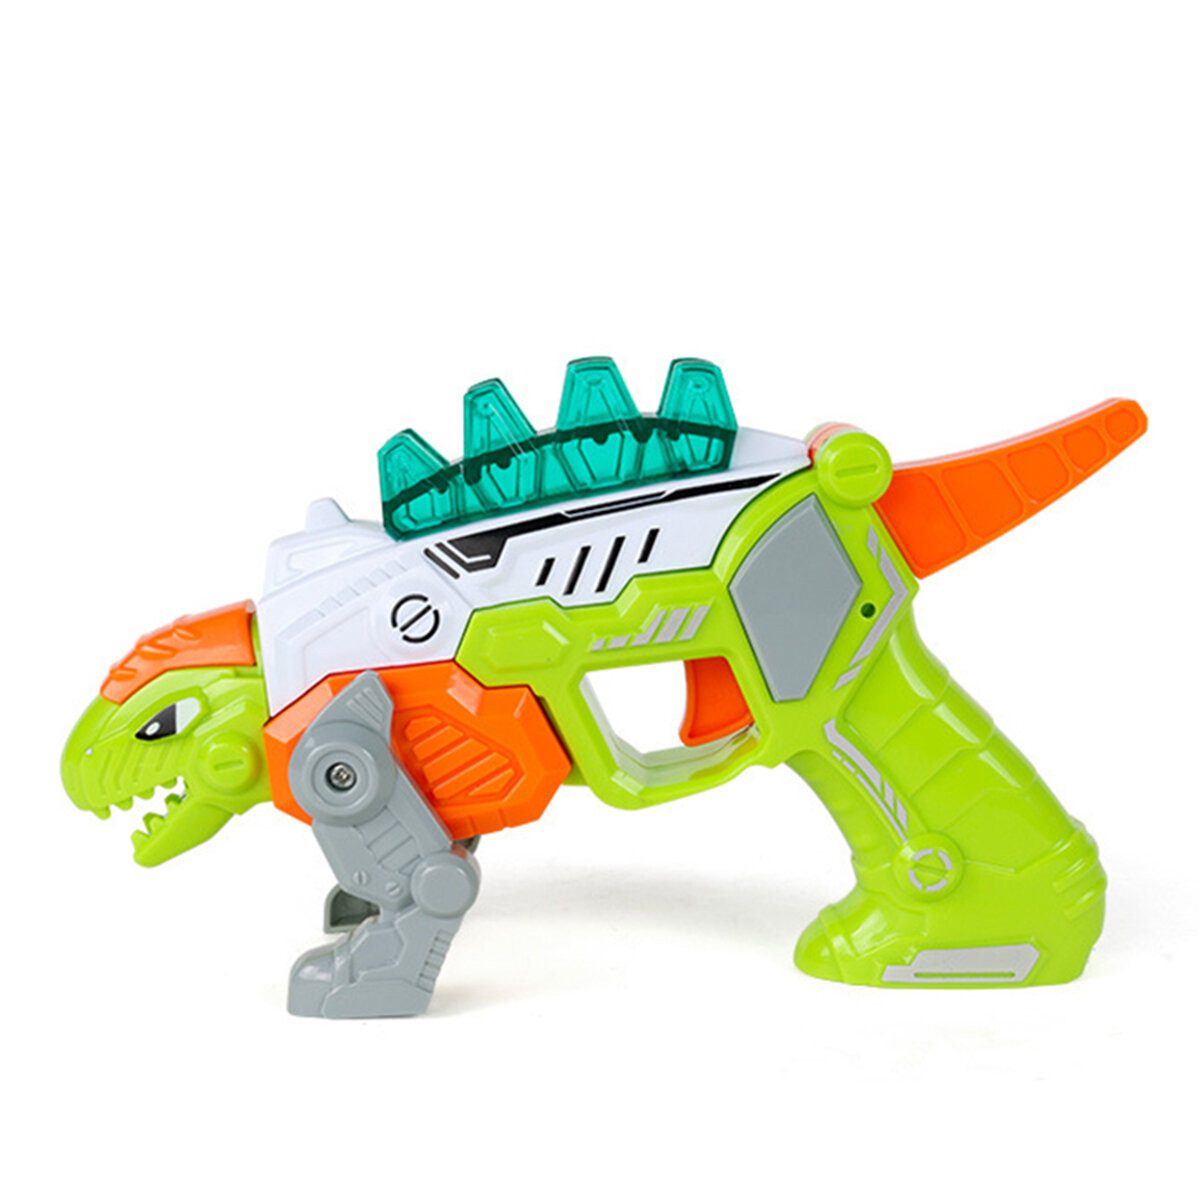 

2 in 1 Dinosaur Model Toy Fun For Kids Children Boys with Sound Light Gift Early Education Puzzle Toy for Children